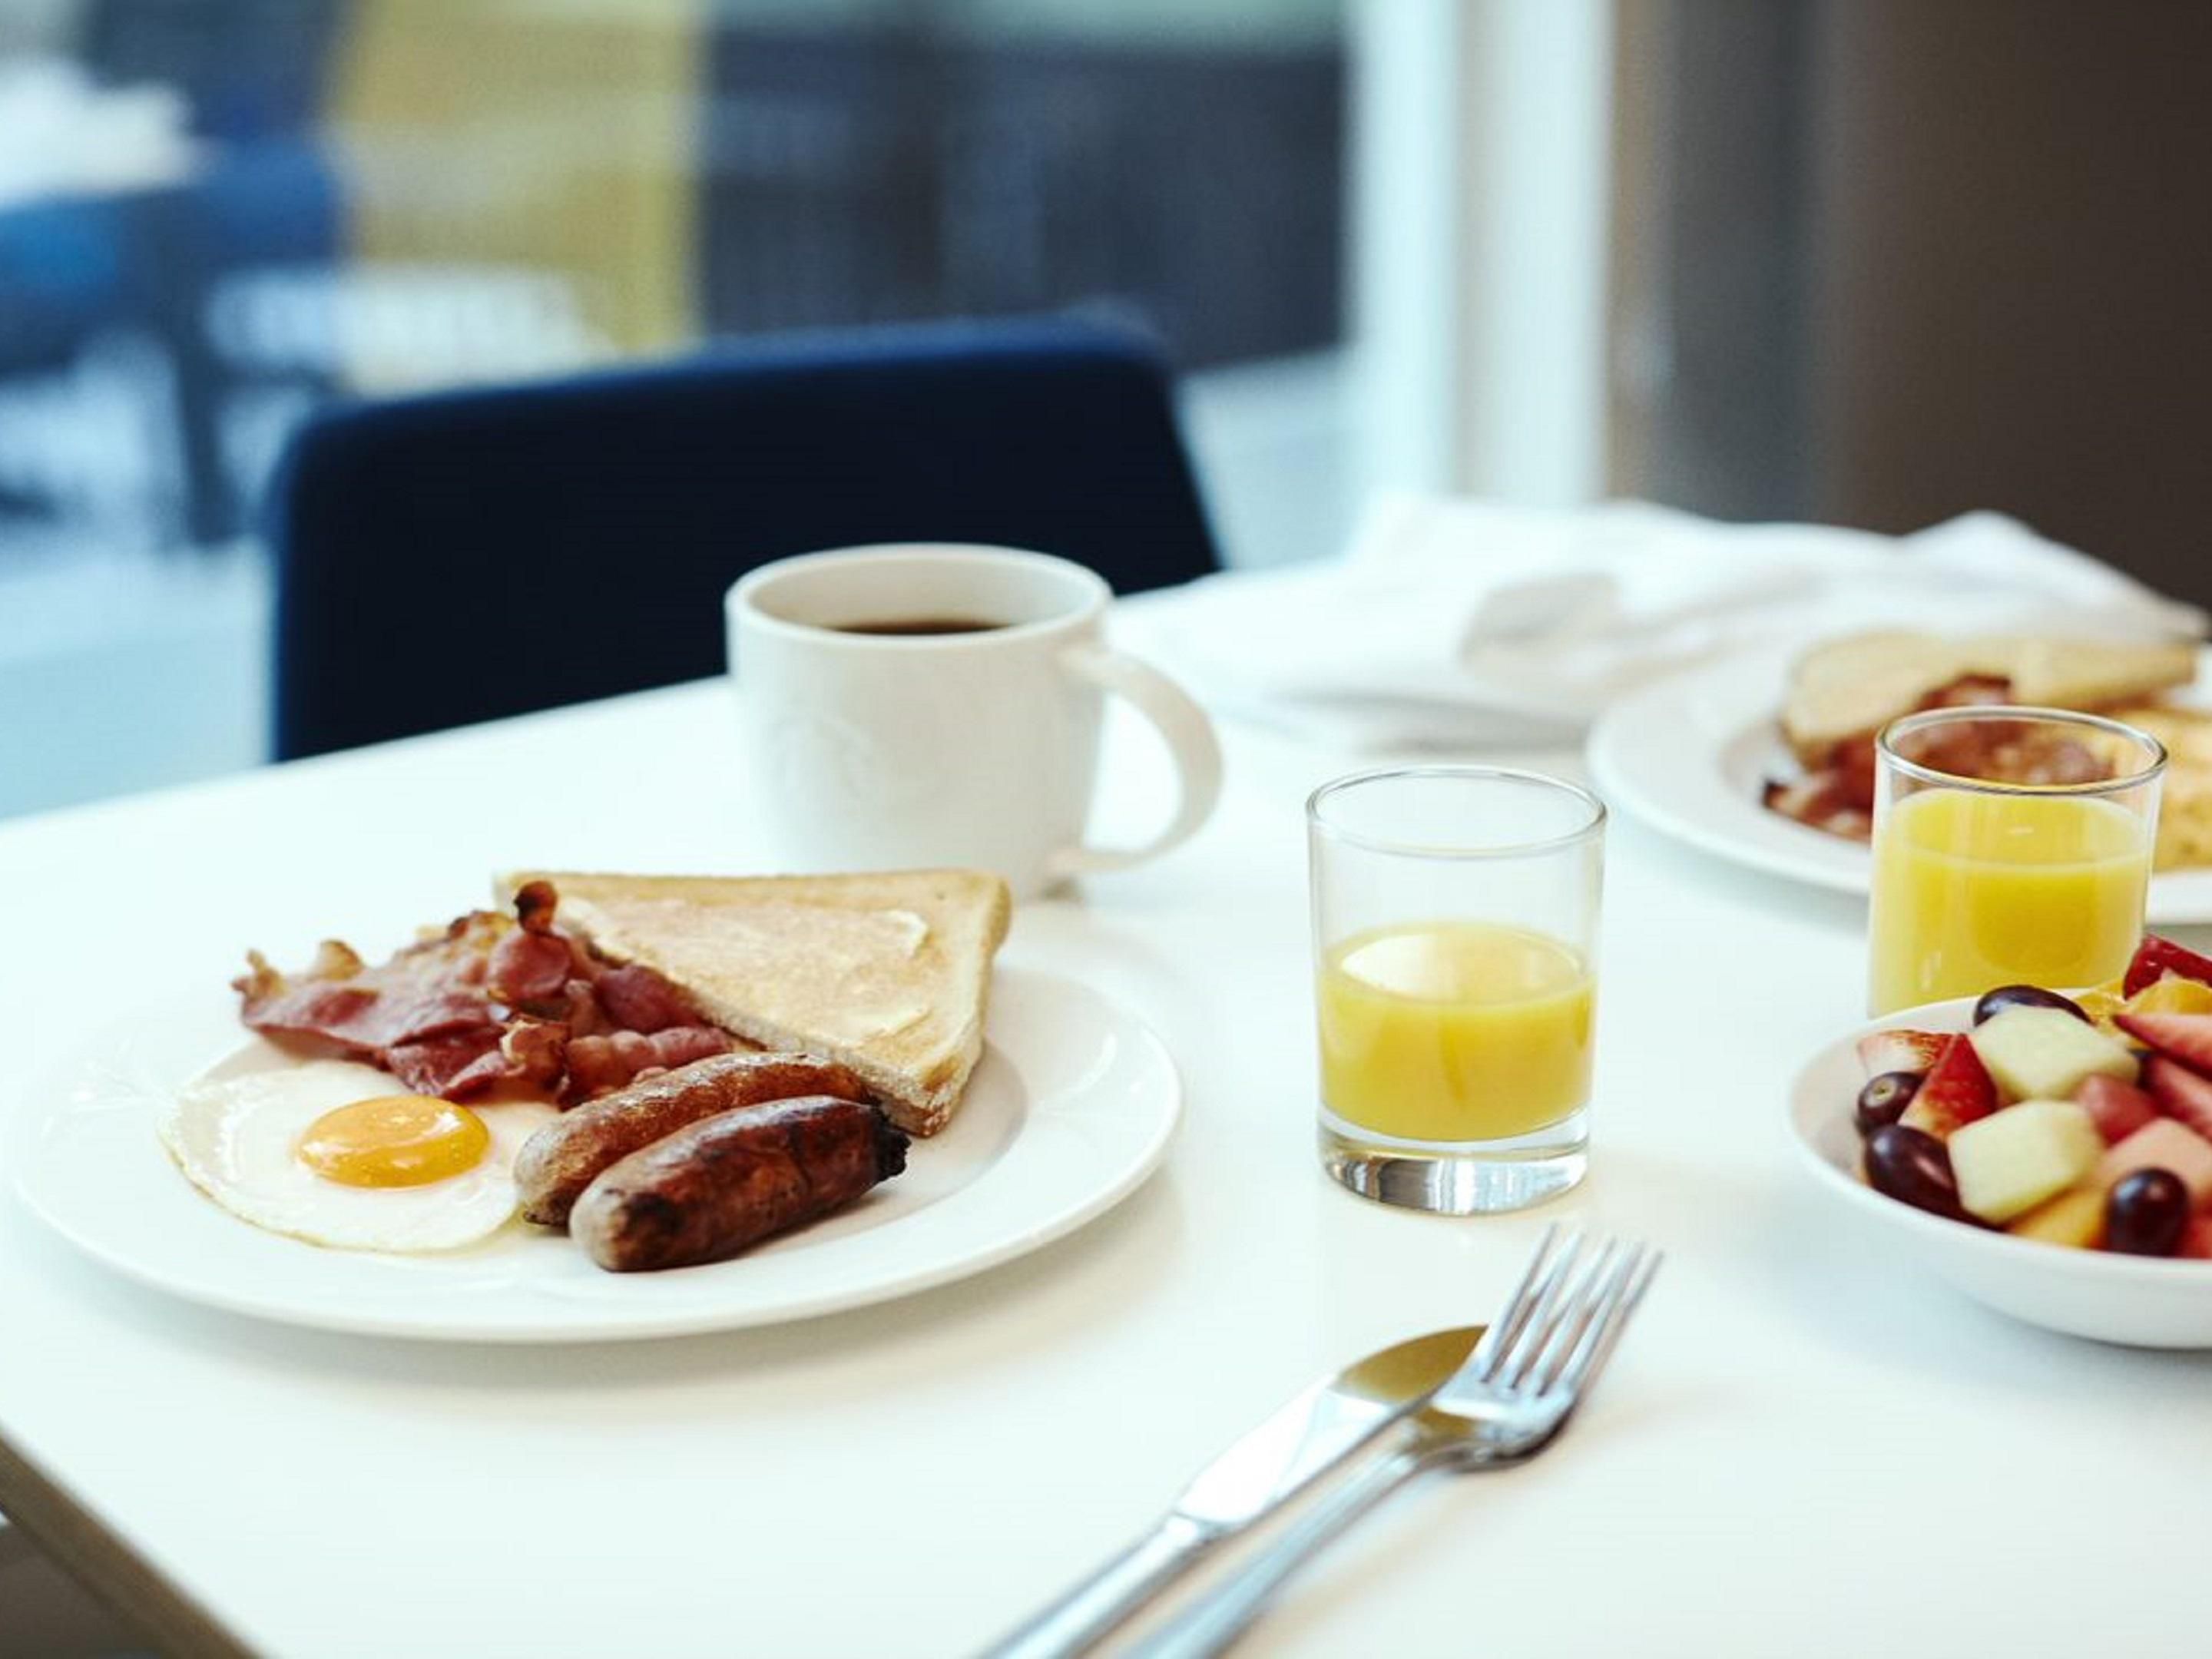 Start the day with our breakfast served daily, featuring a range of delicious hot and cold items -- sure to please everyone!